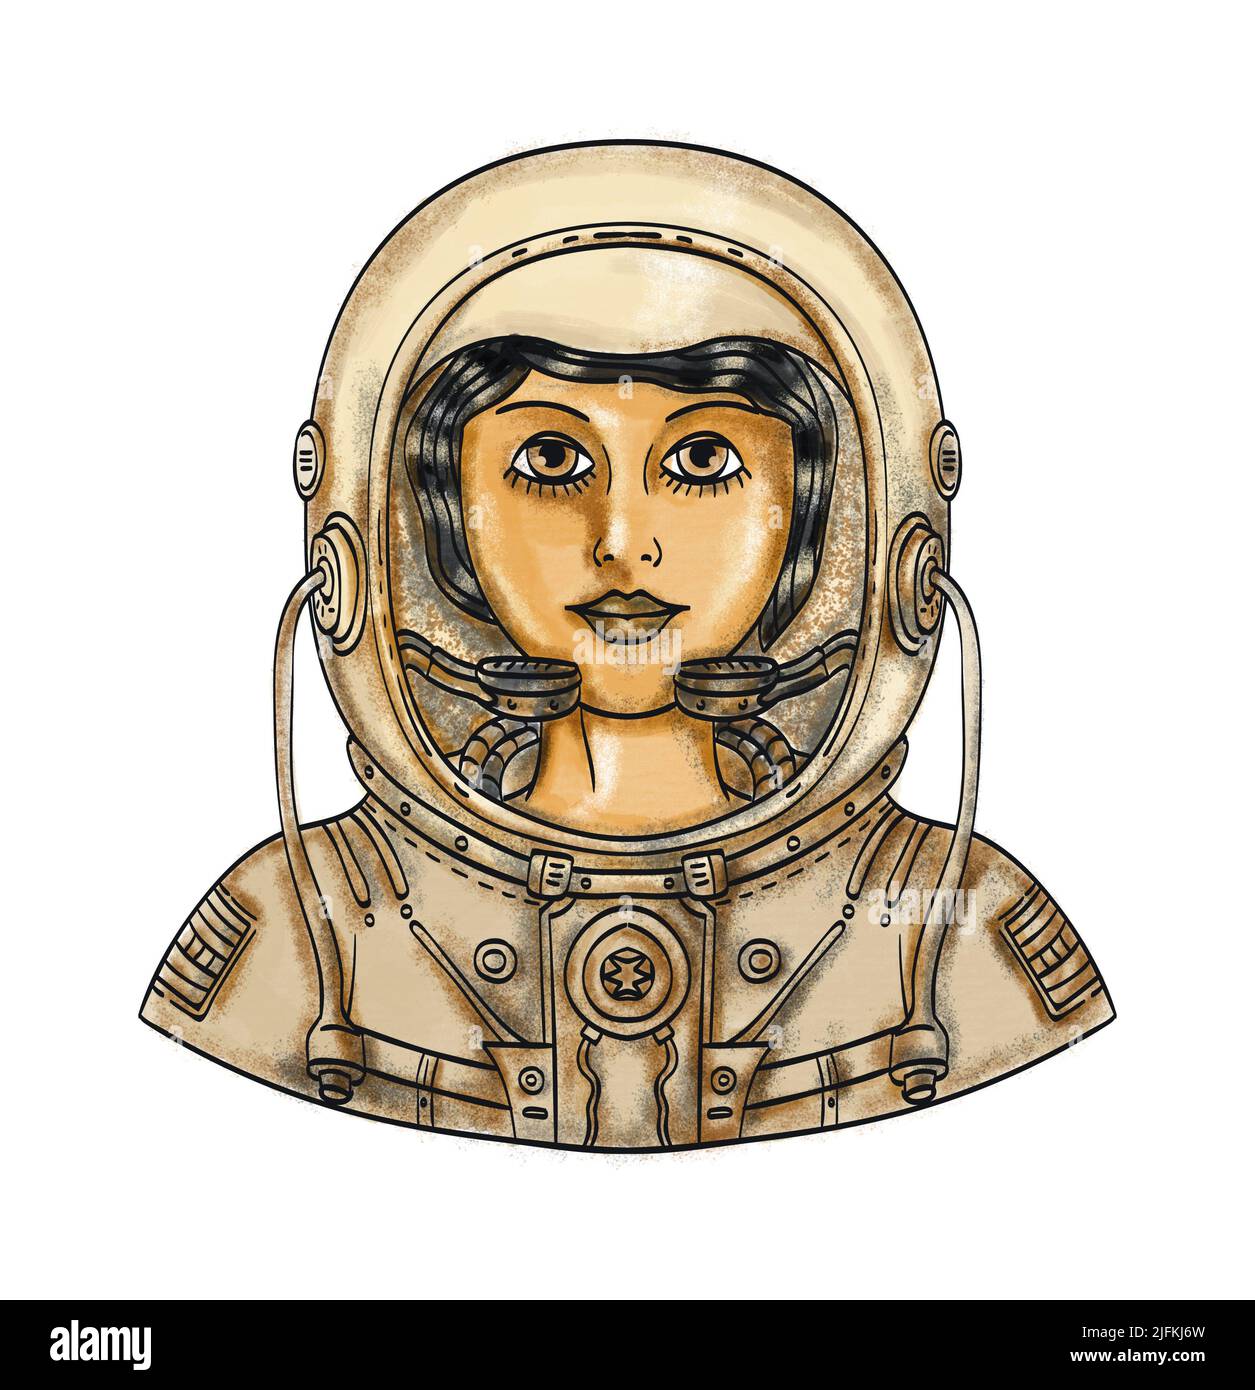 30 Cool Astronaut Tattoo Designs for Space Lovers  rAstronomy